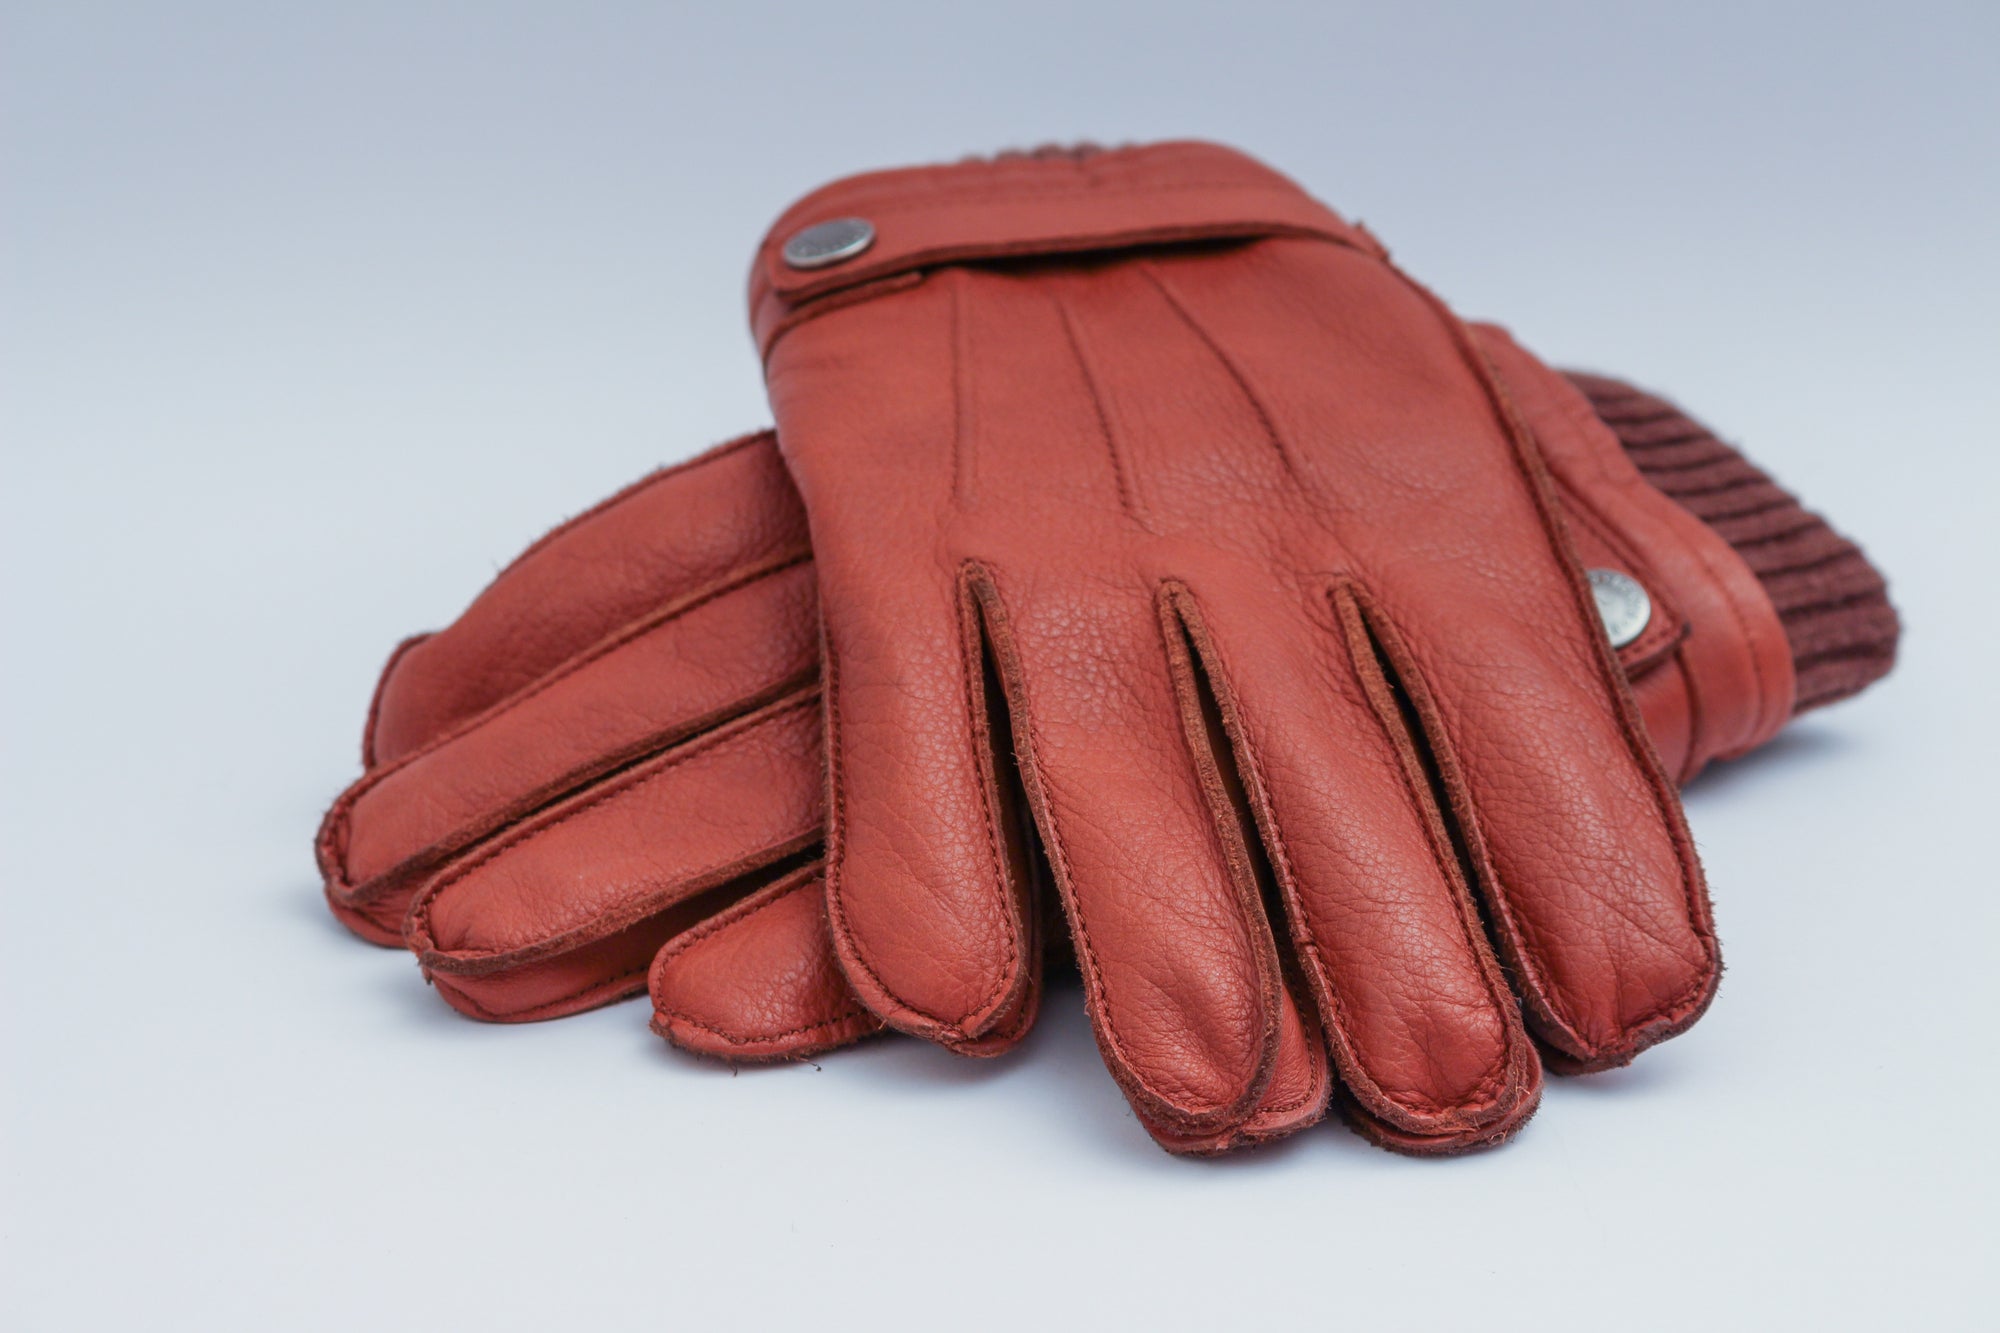 If you’re still searching for that perfect present, check out why gloves are the best choice this year.